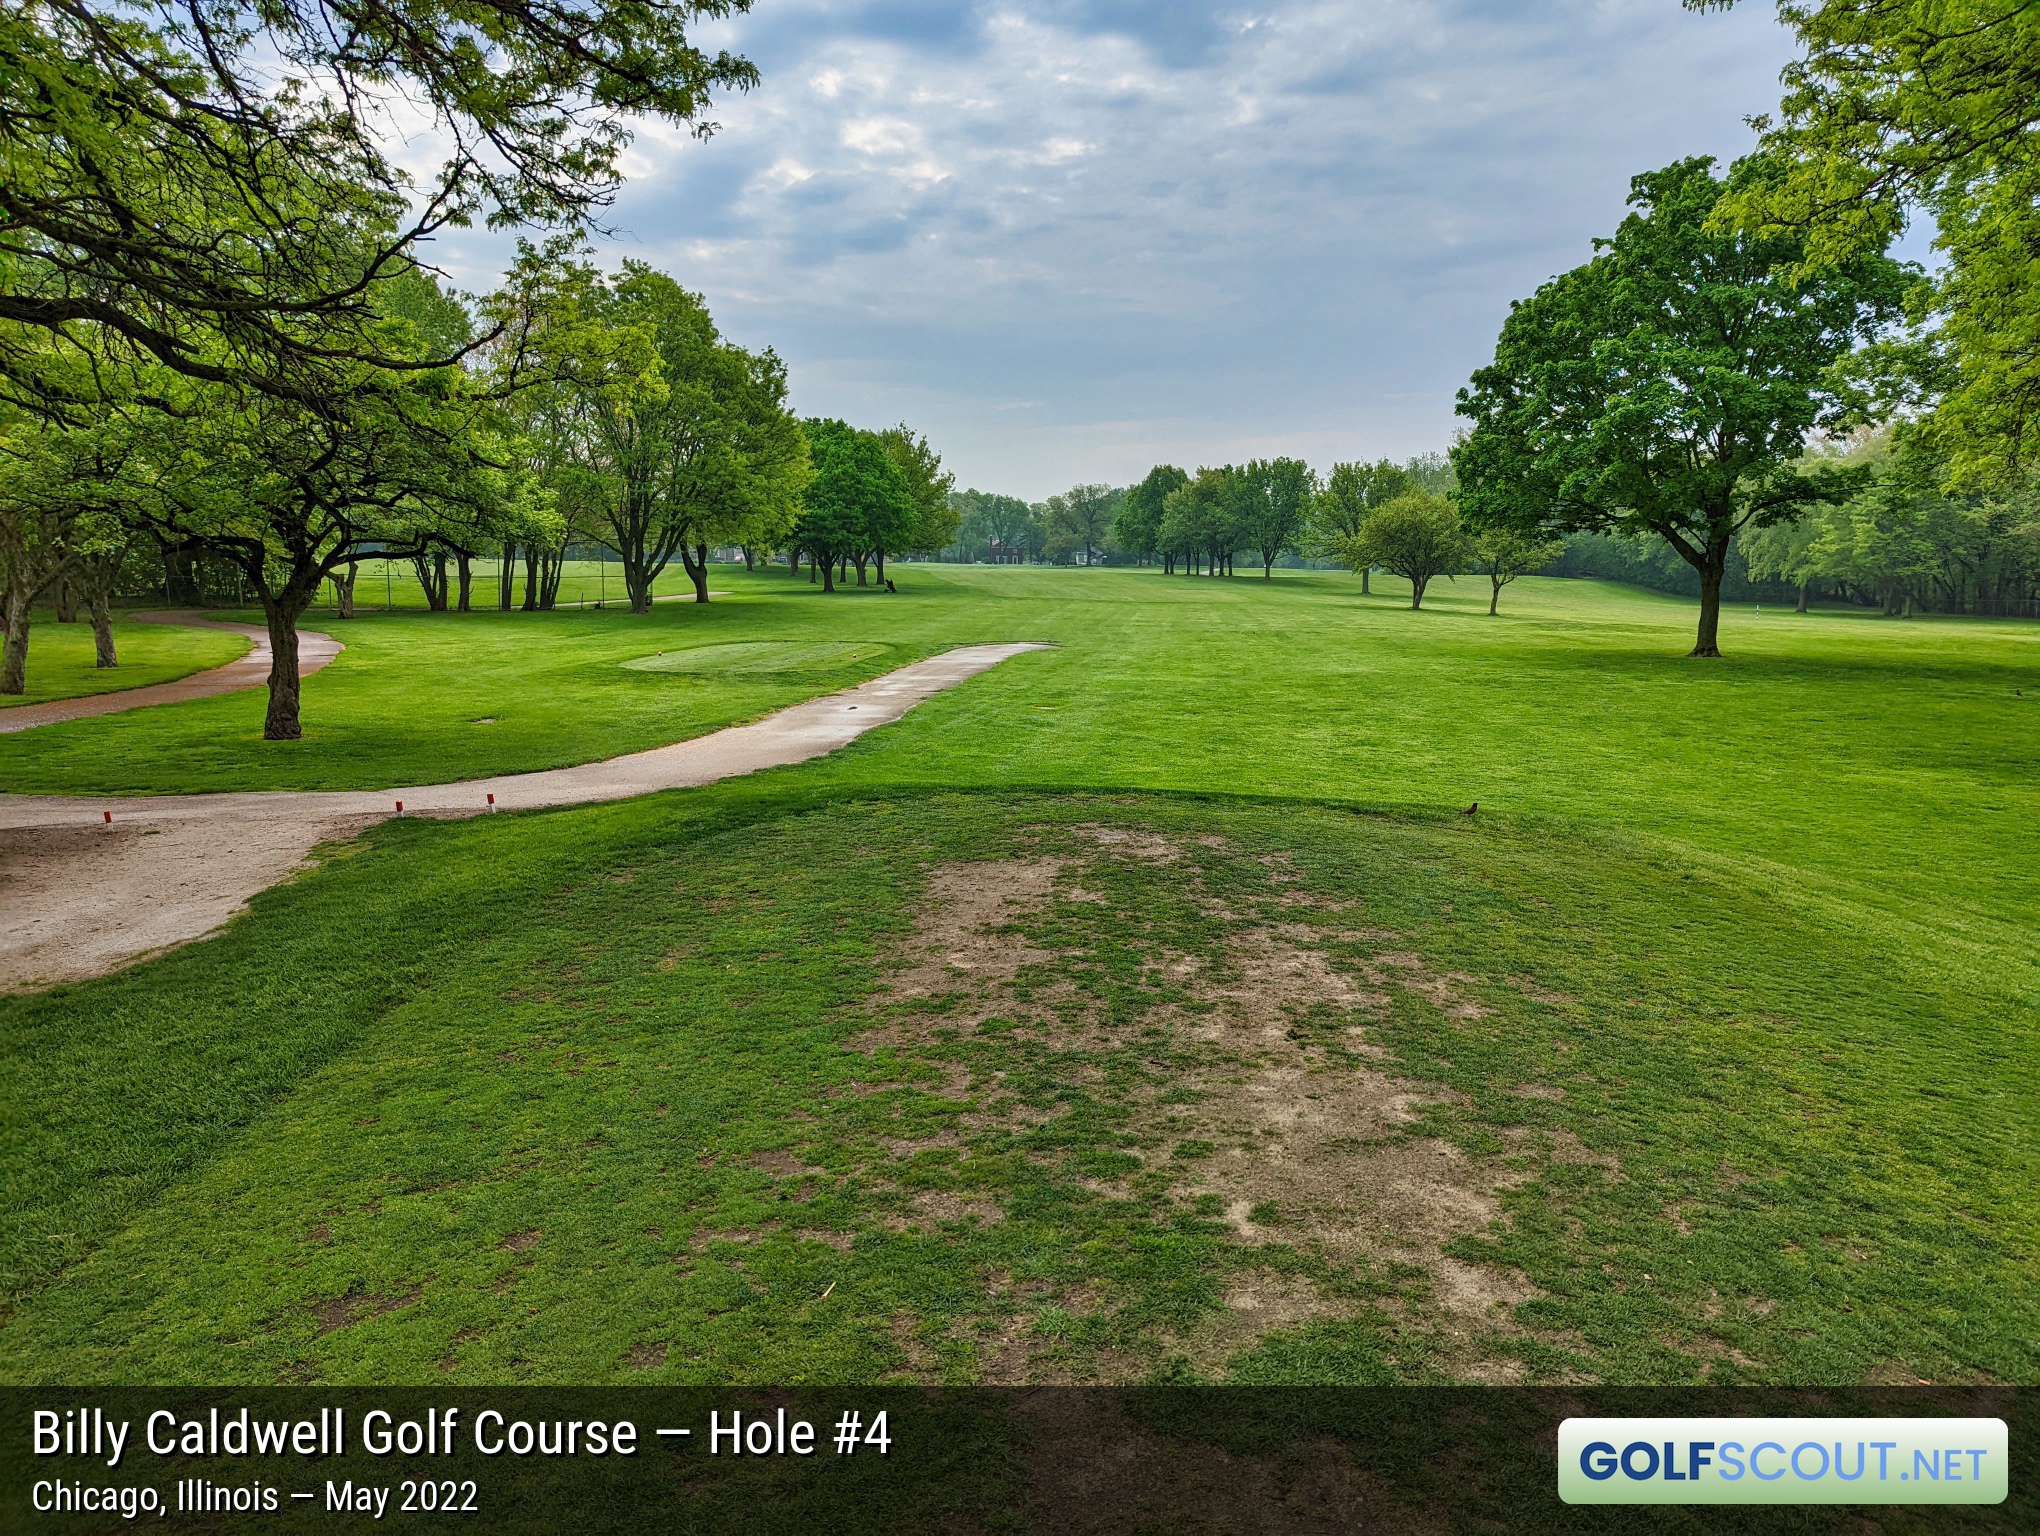 Photo of hole #4 at Billy Caldwell Golf Course in Chicago, Illinois. 